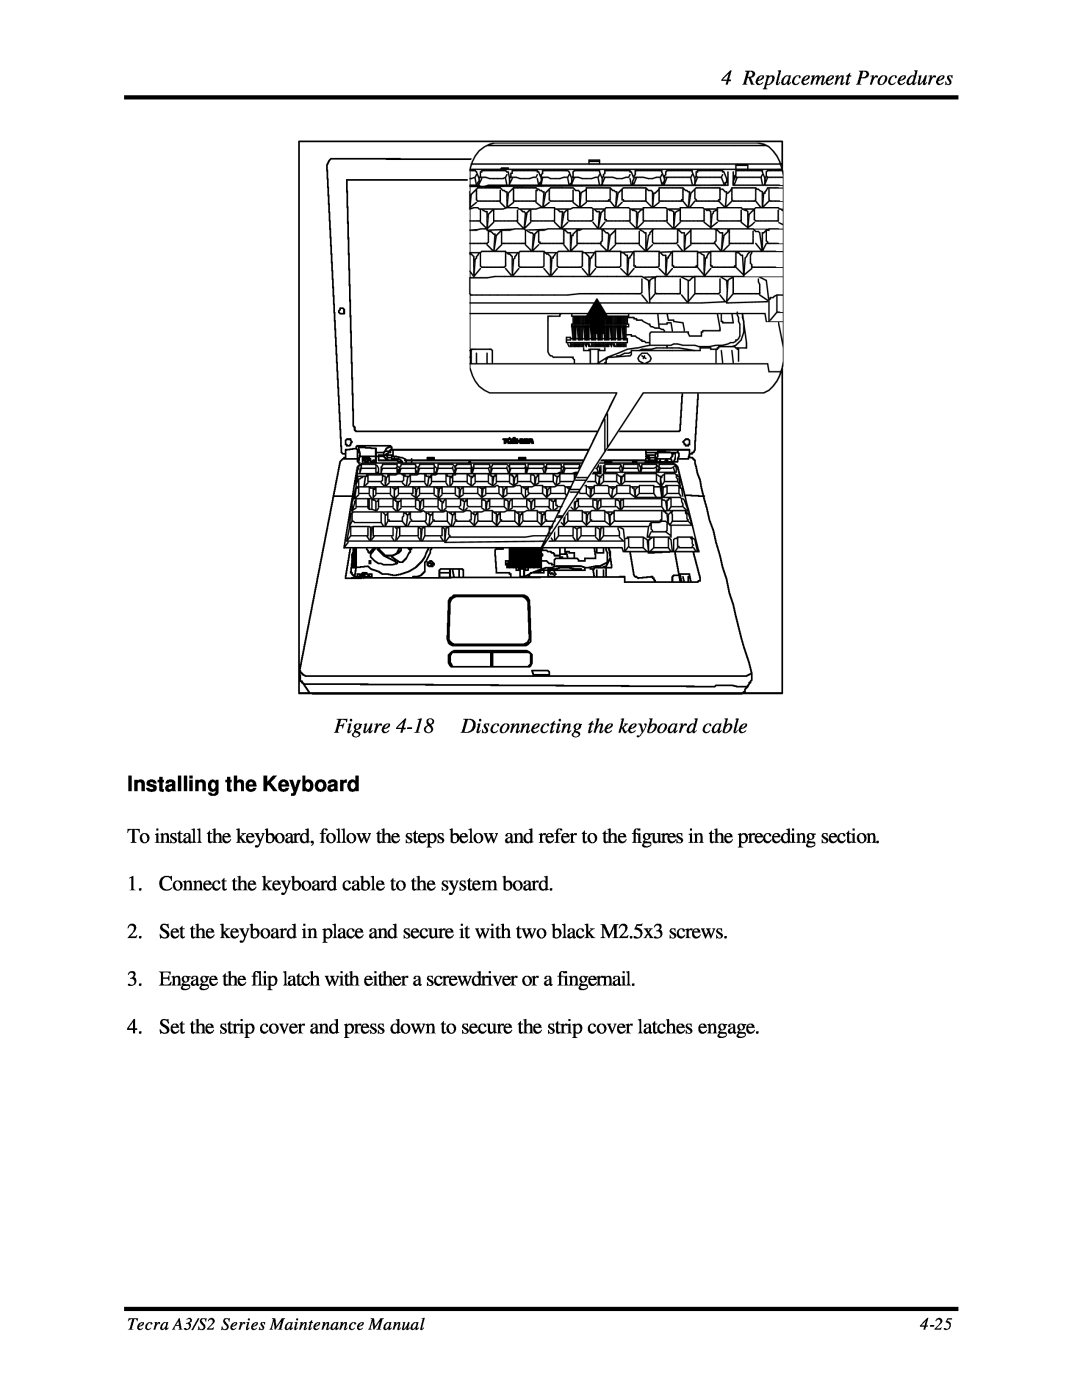 Toshiba S2 manual Replacement Procedures -18 Disconnecting the keyboard cable, Installing the Keyboard 